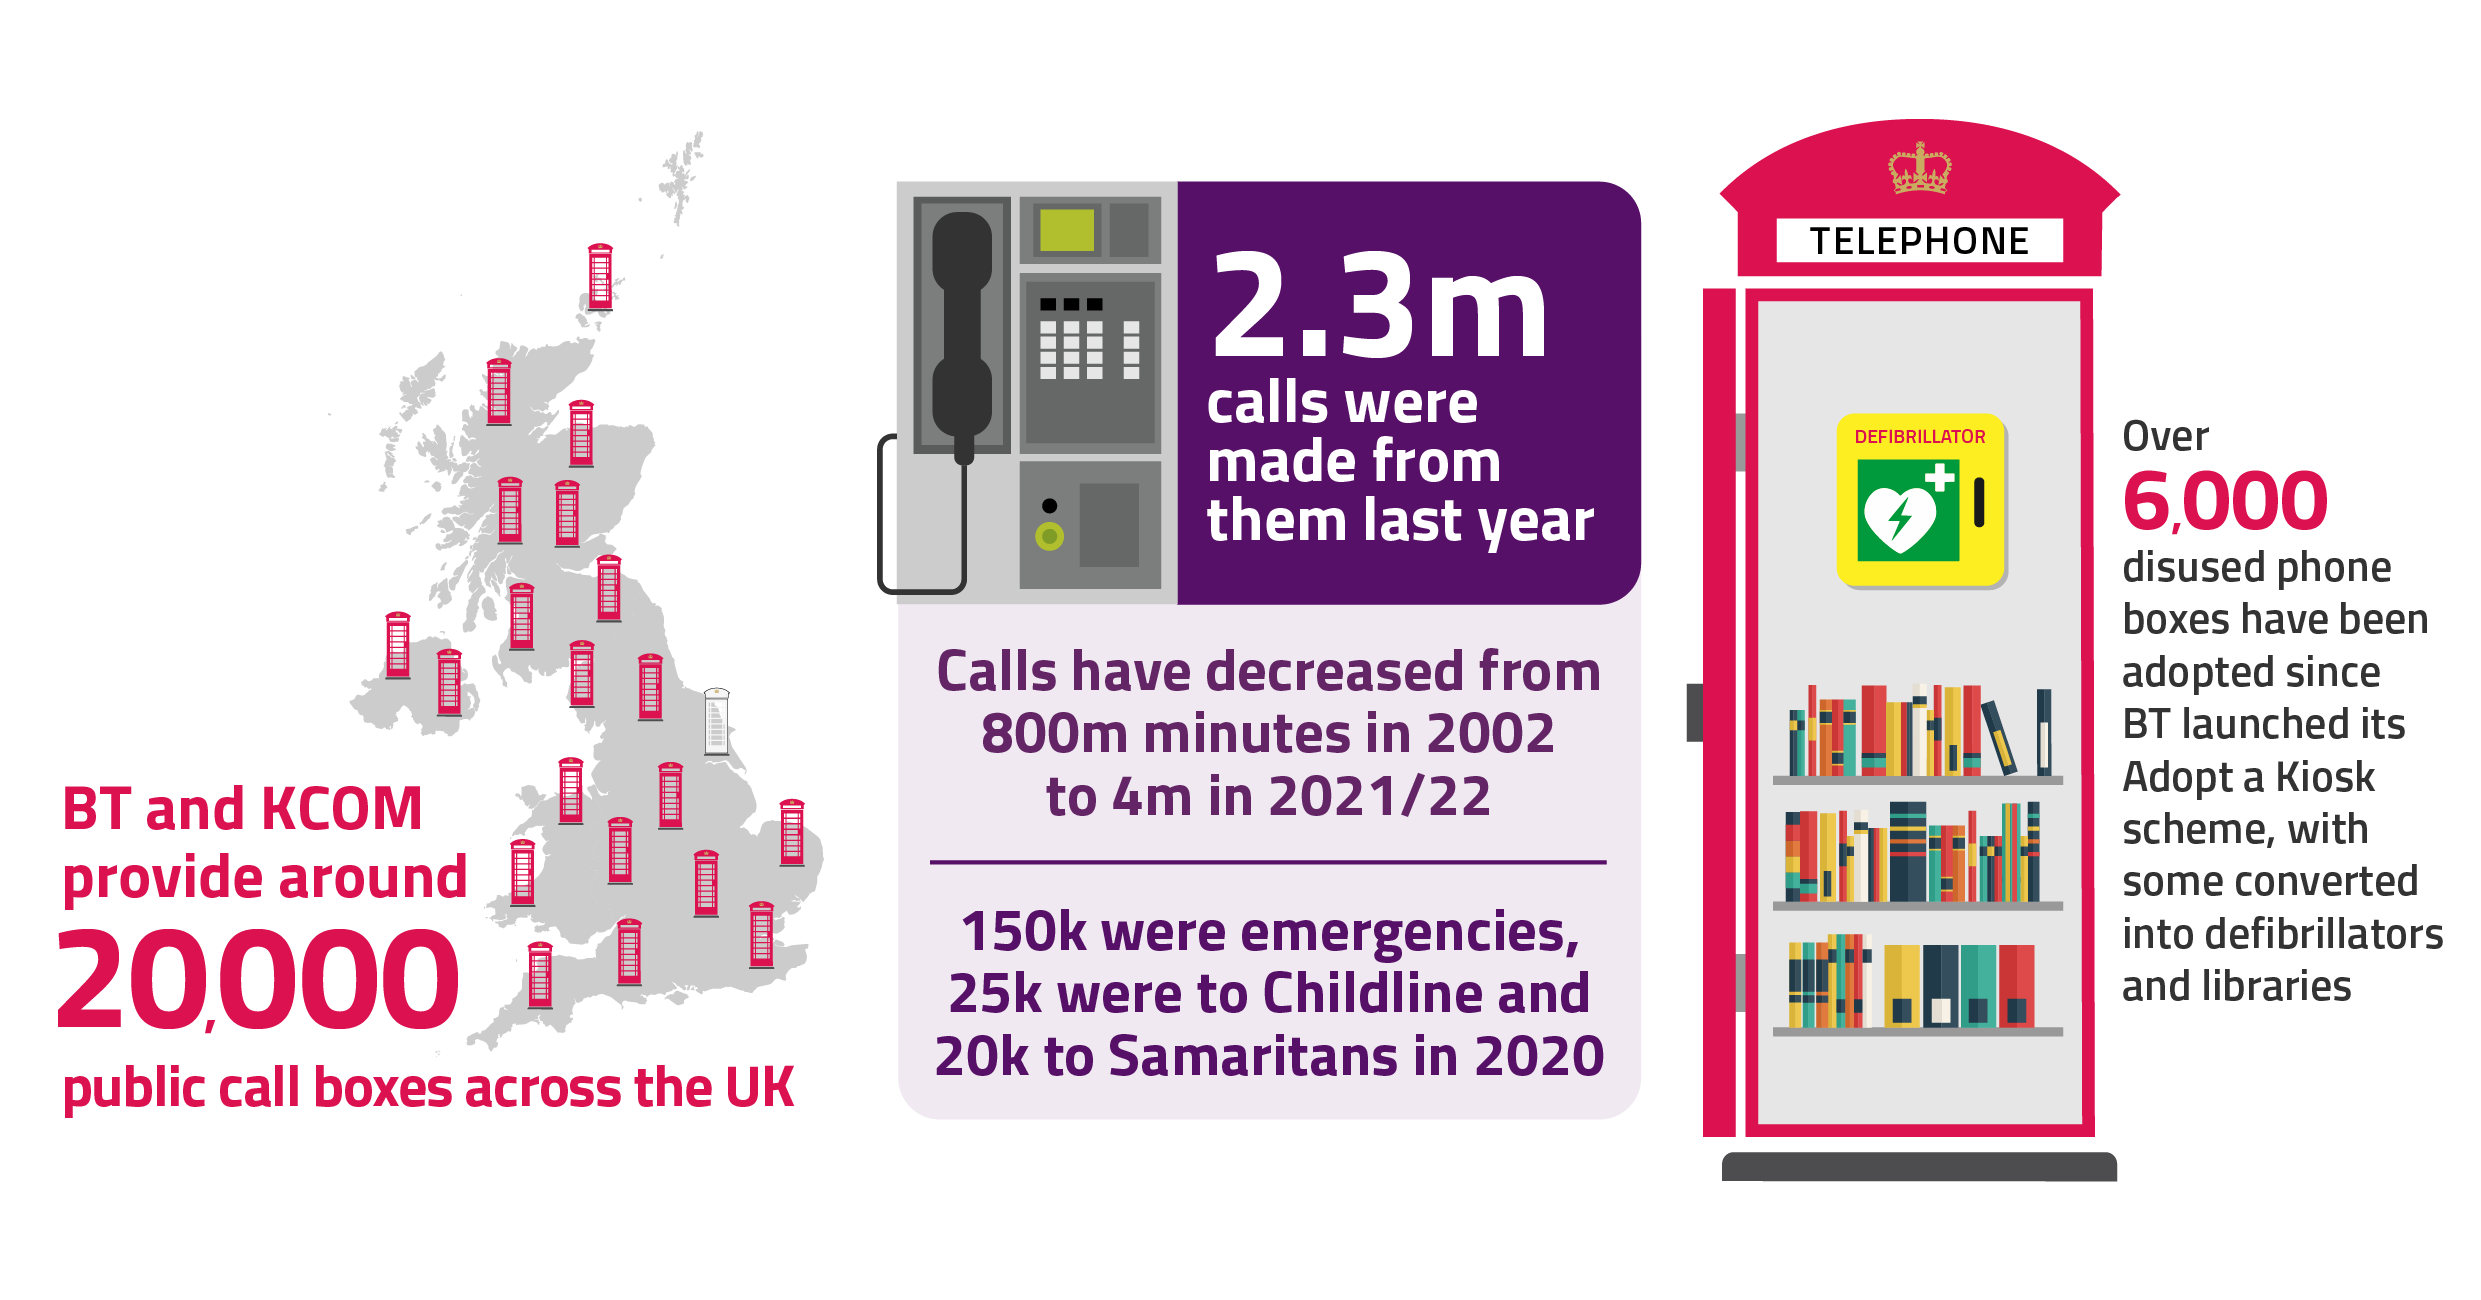 BT and KCOM provide around 21000 public call boxes across the U K.  5 million calls were made from them last year, 150000 were emergencies, 25000 were to childline and 20k to samaritans. Calls have decreased from 800m minutes in 2002 to 7 million in 2020. Since BT launched its adopt a kiosk scheme over 6000 kiosks have been converted into defibrillators and libraries.